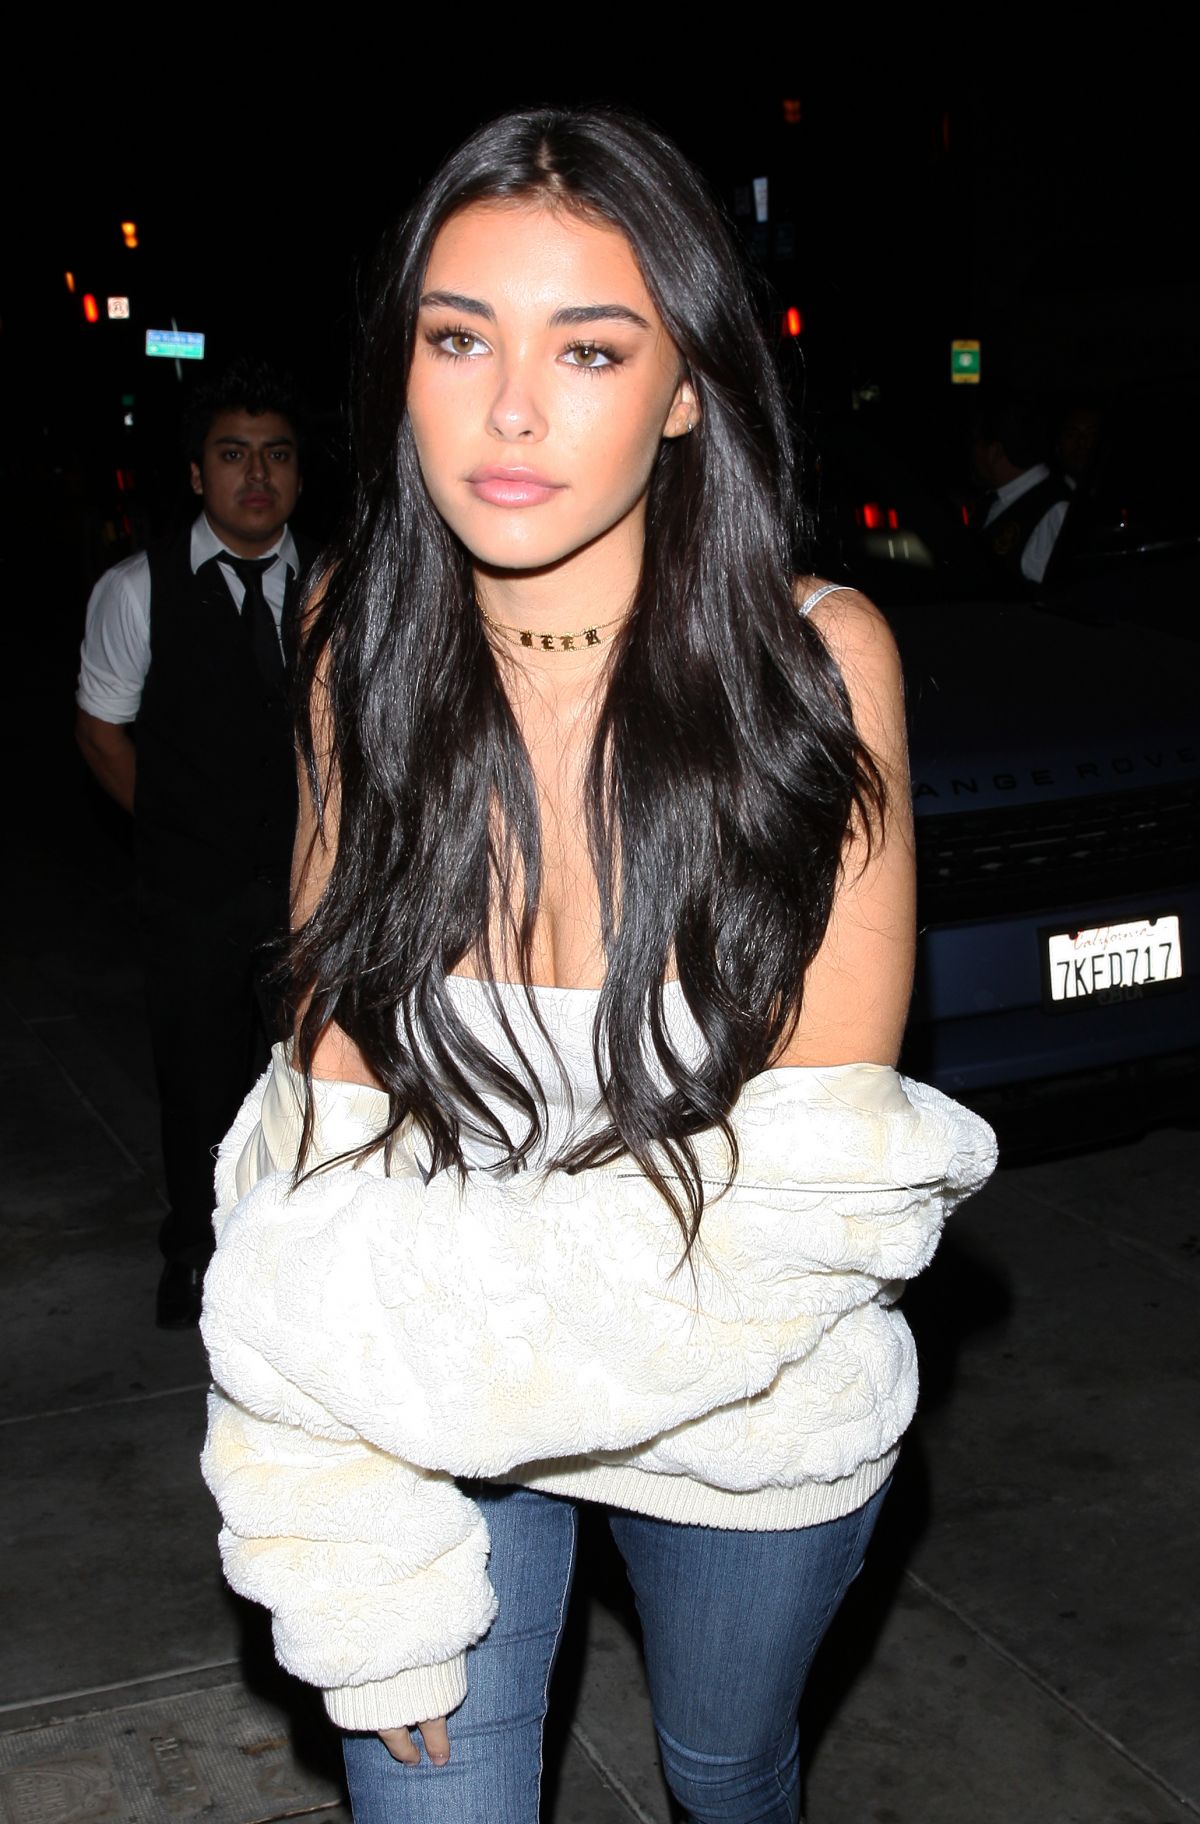 MADISON BEER at Catch LA in West Hollywood 11/04/2016 – HawtCelebs